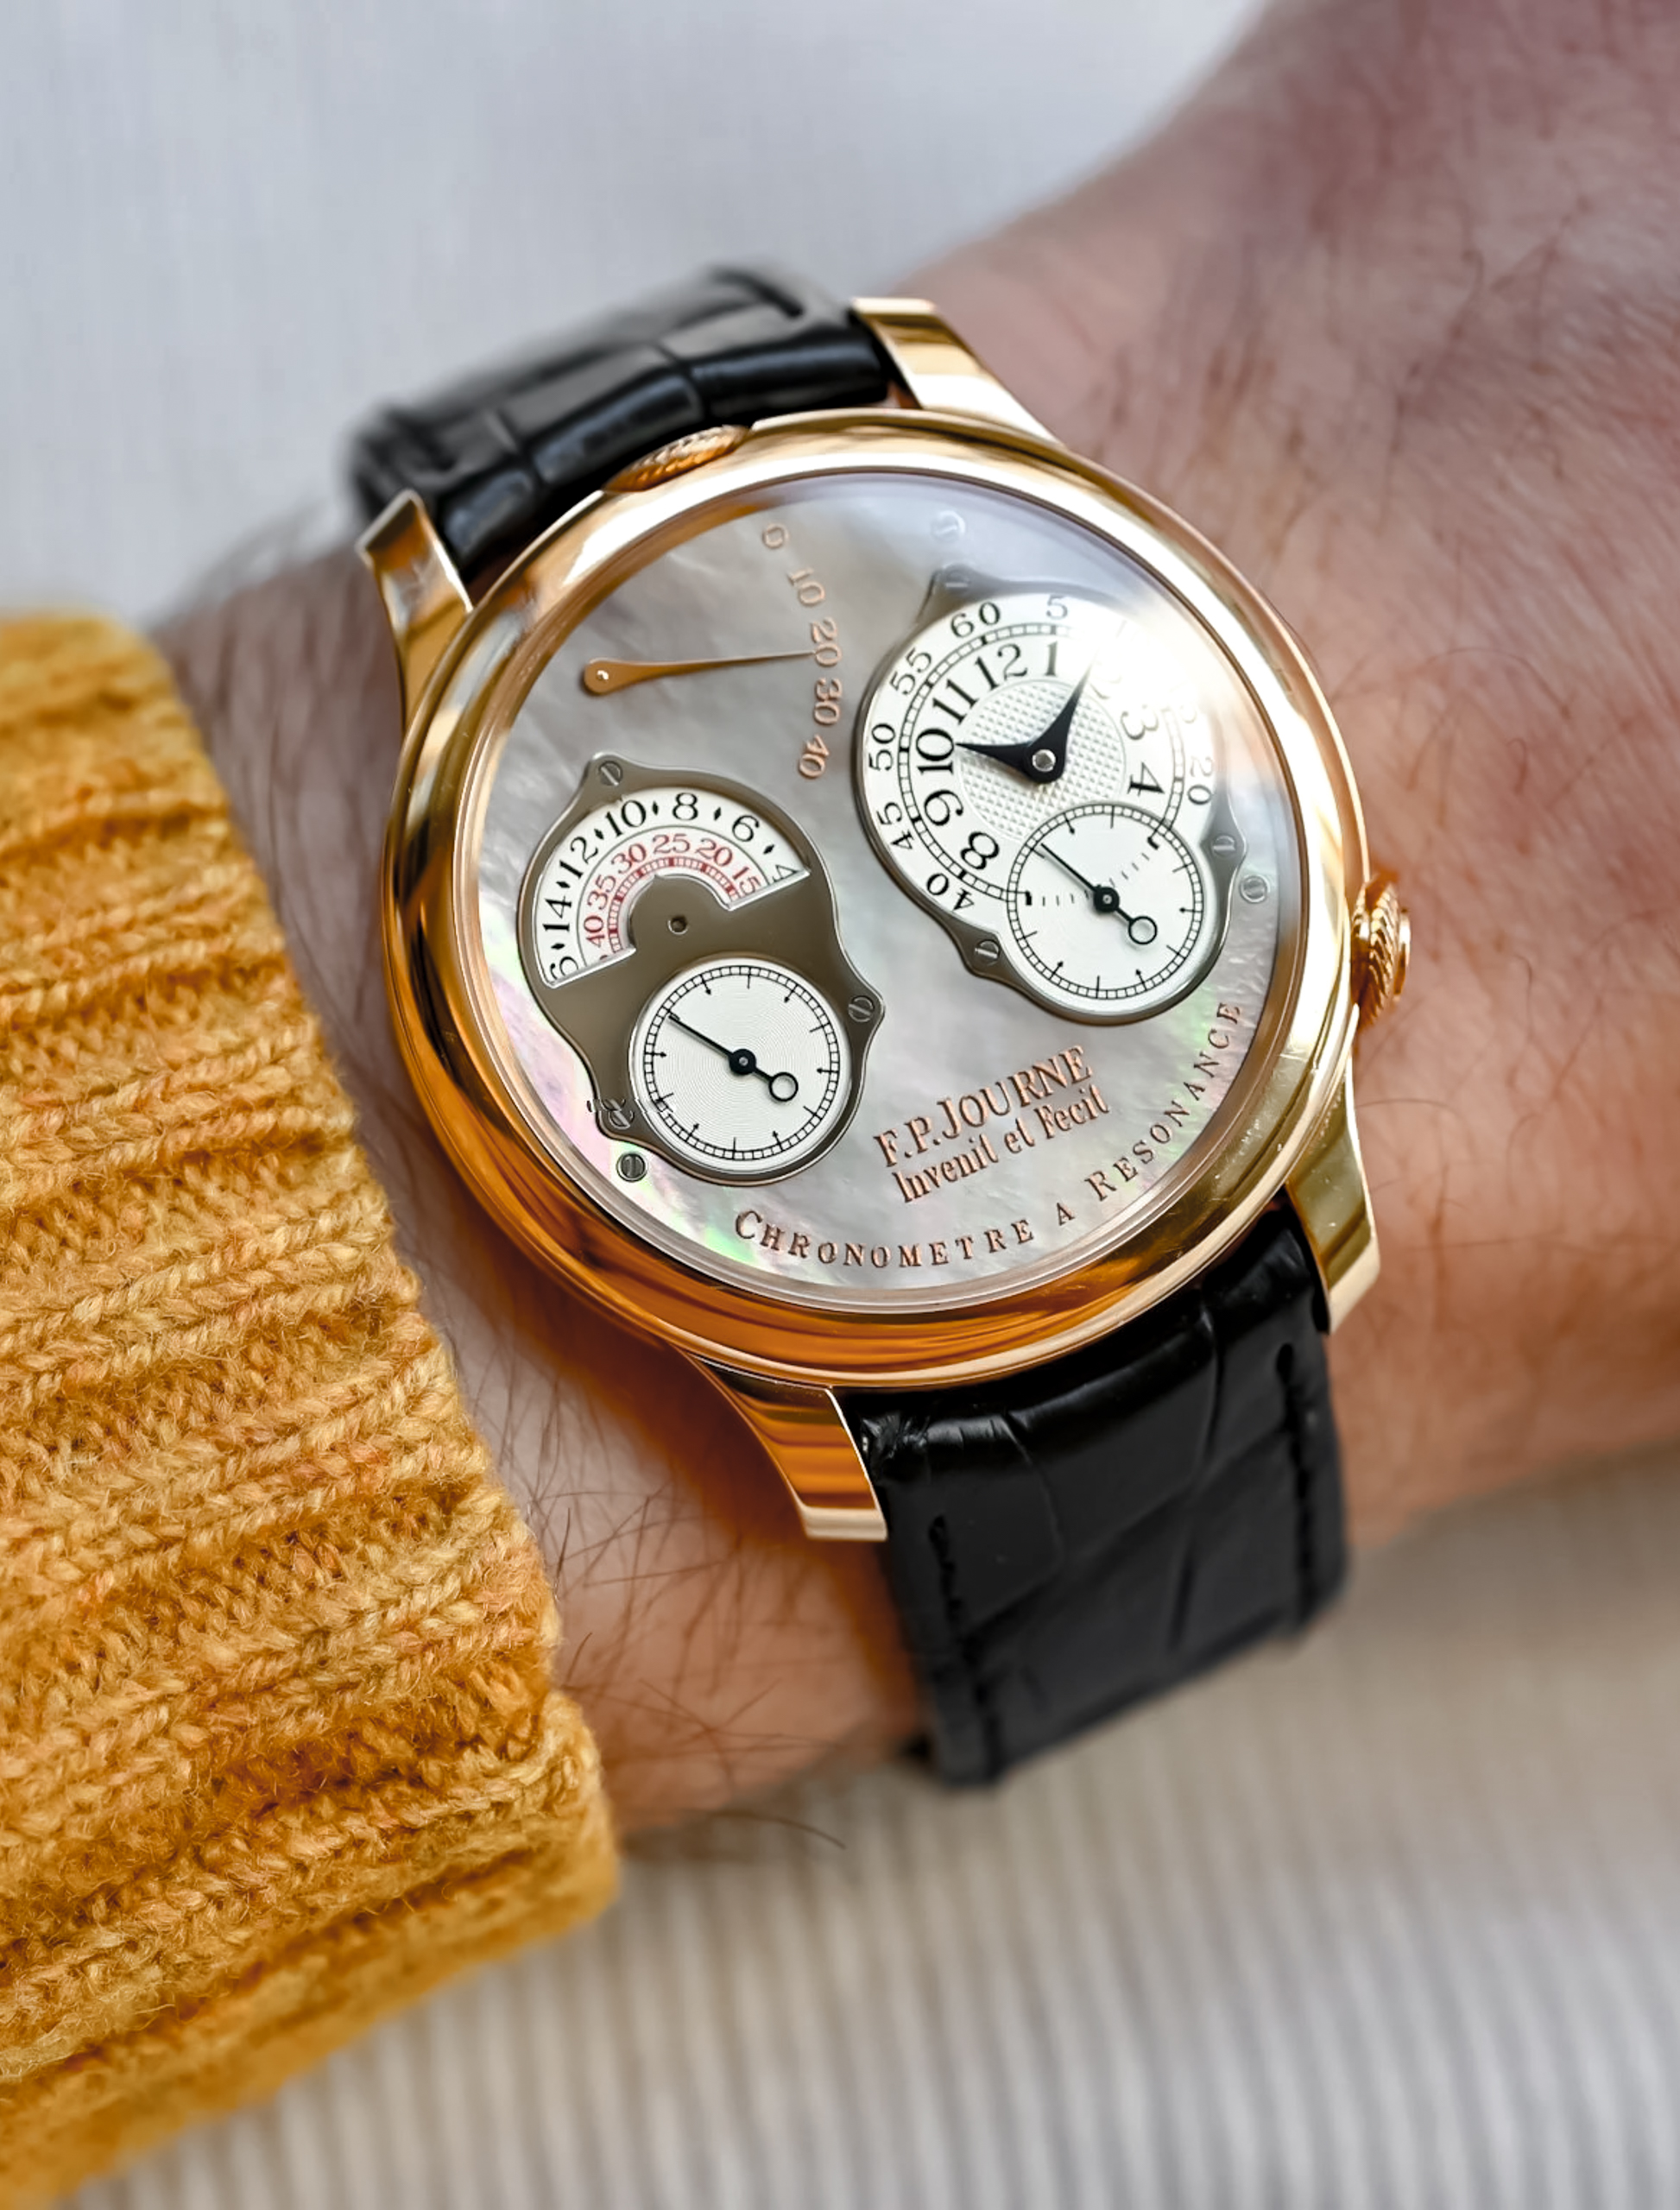 Mother-of-pearl-FP-Journe-Resonance